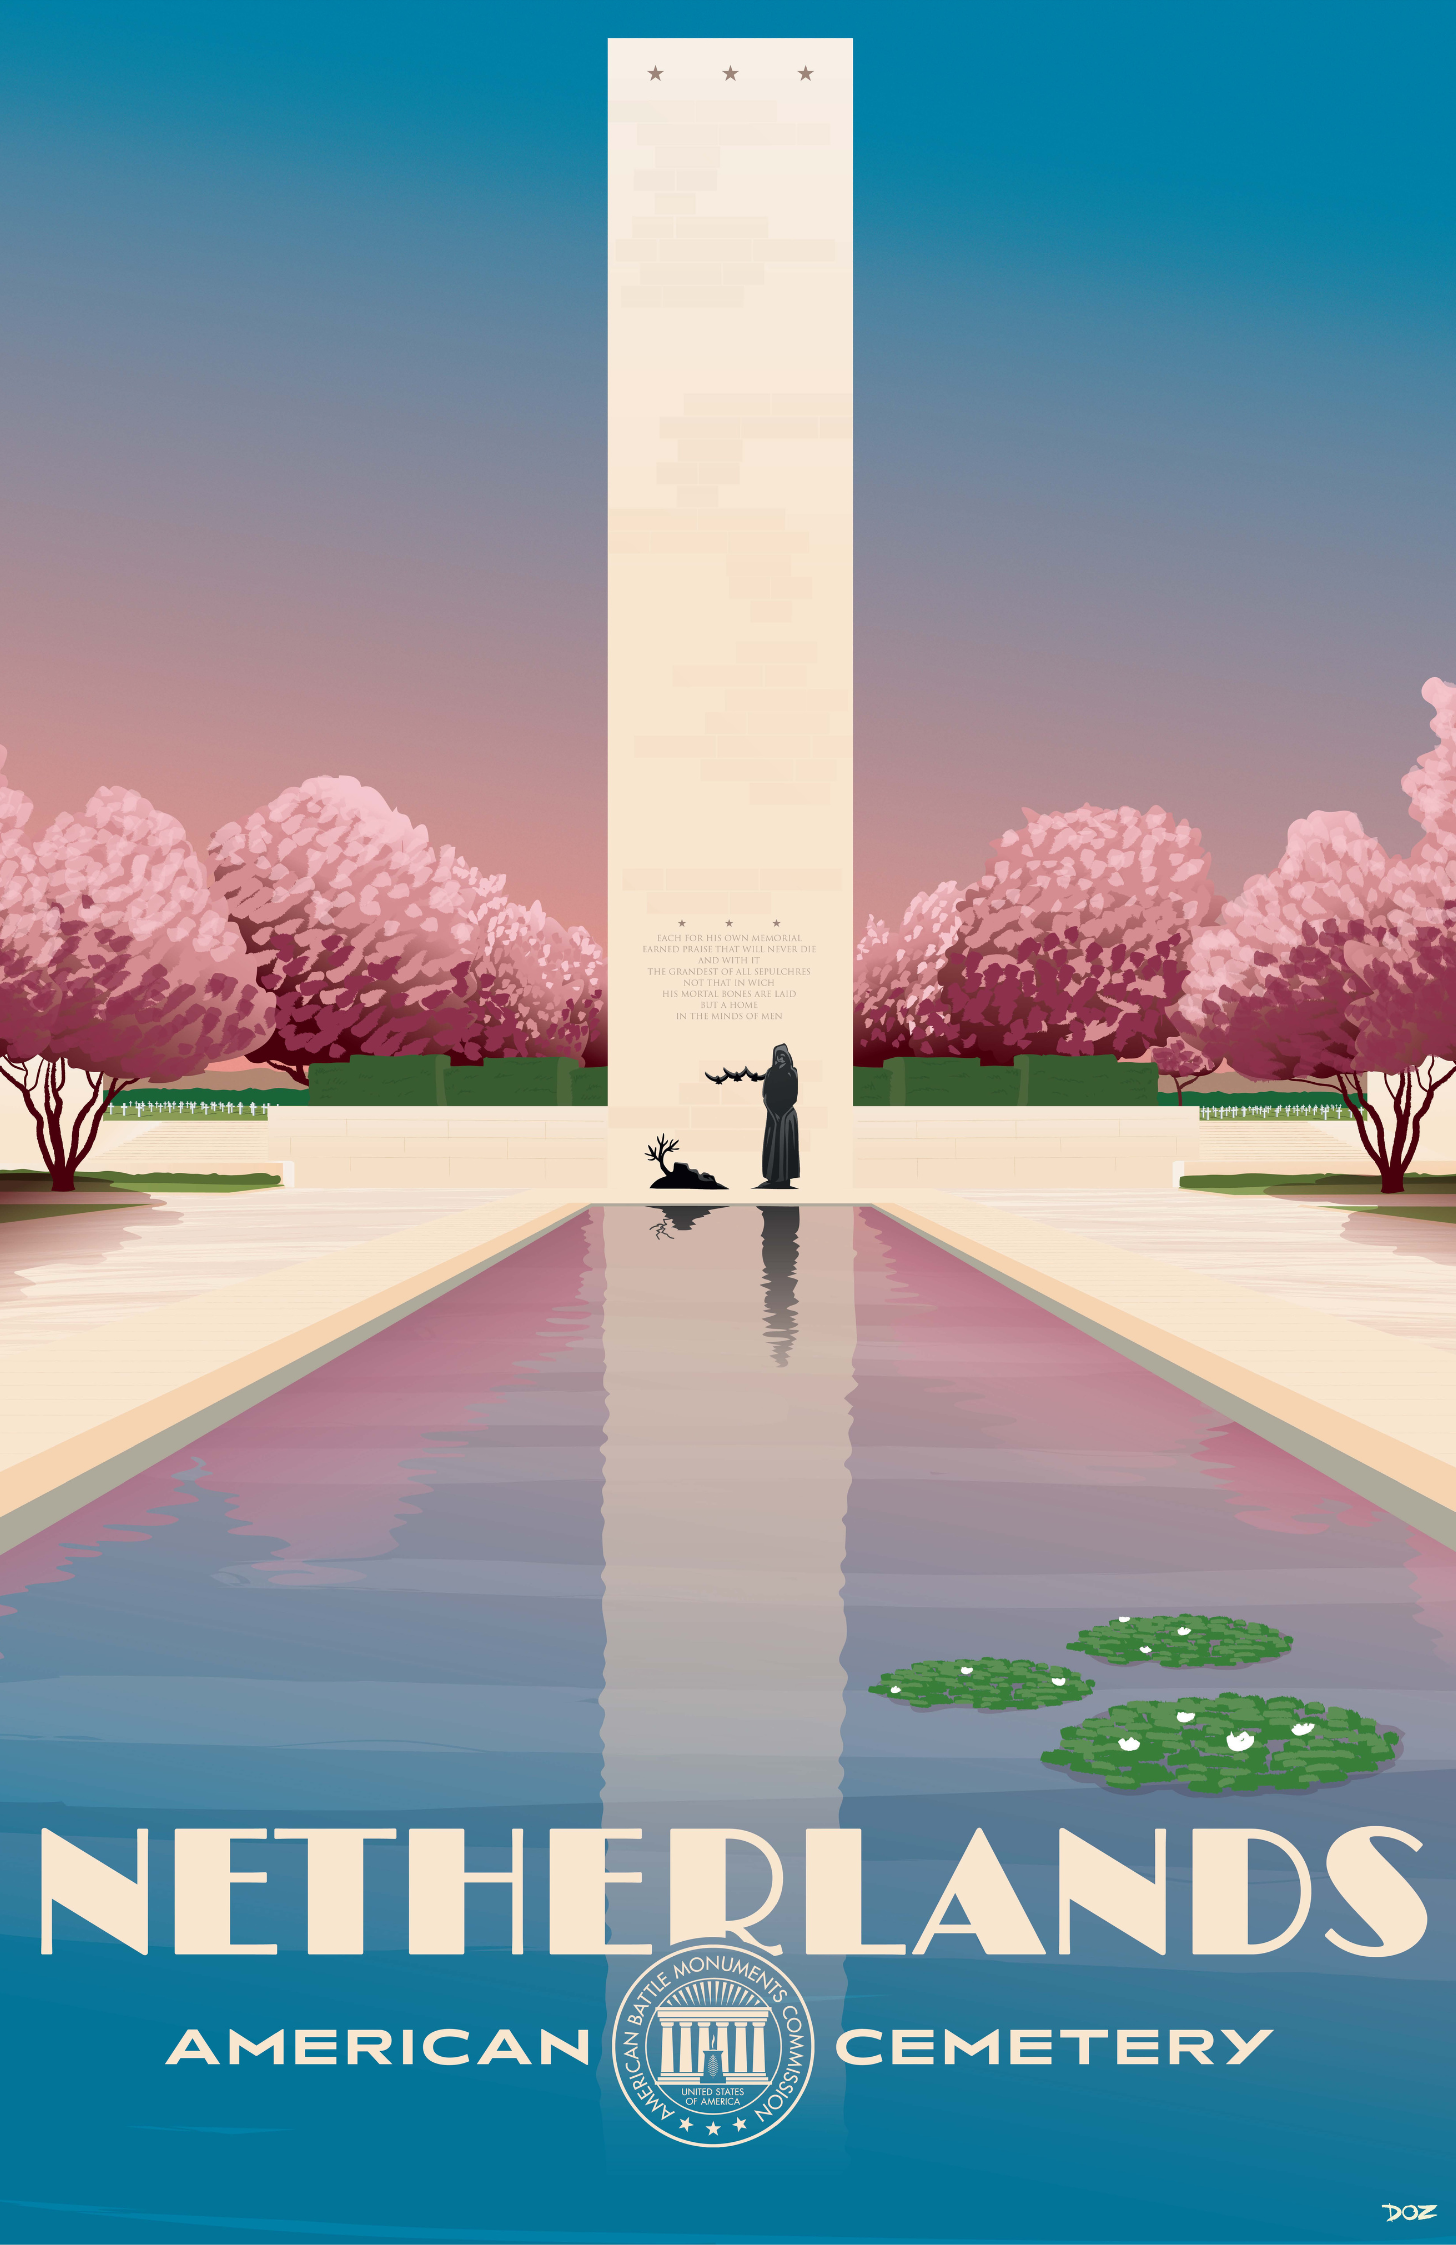 Vintage poster of Netherlands American Cemetery